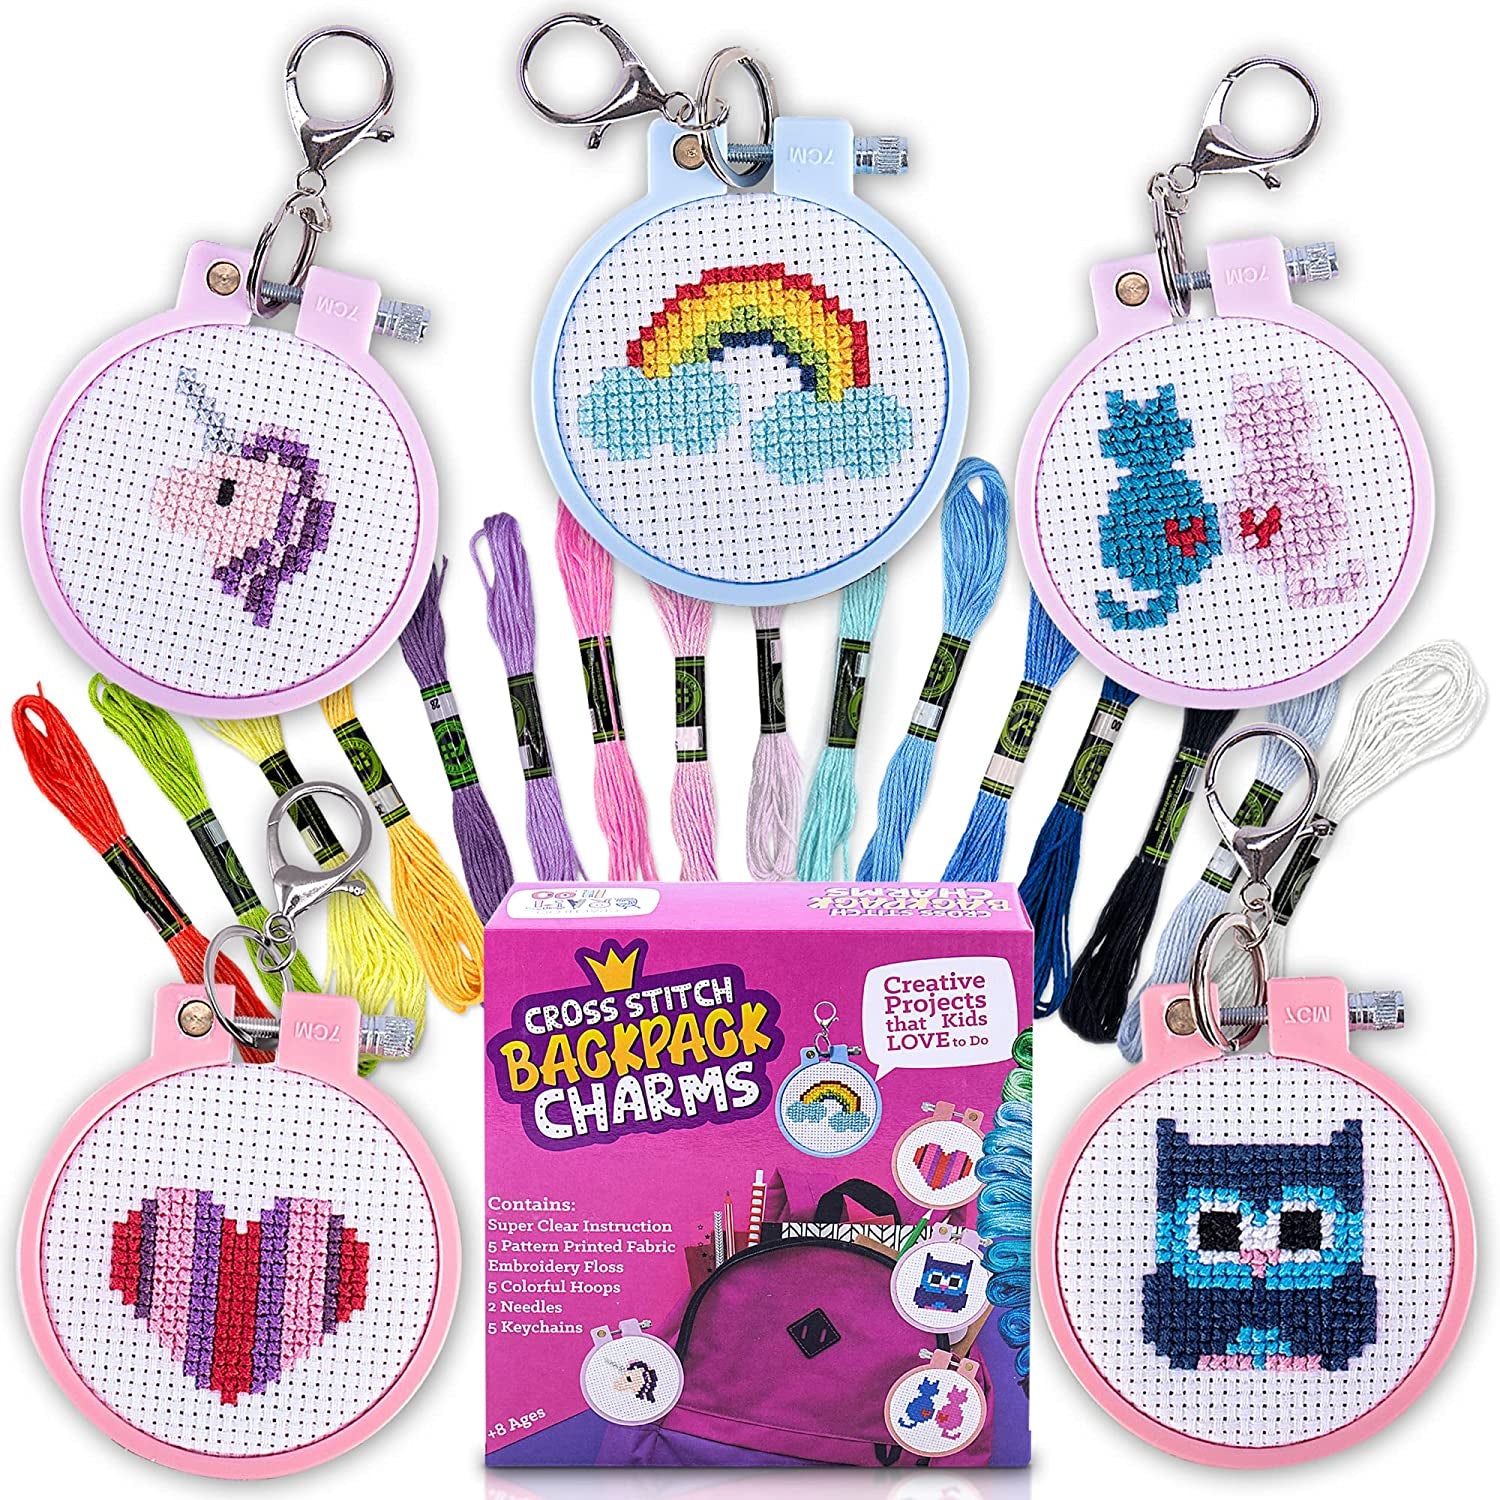 Cross Stitch Kits for Beginners. 5 Stamped Cross Stitch Kits for  Kids.Needlepoint Kits for Beginners. Embroidery Kit for Kids. Crossstitch  Kit for Beginners. Girls Cross Stitch Kit Backpack Charms